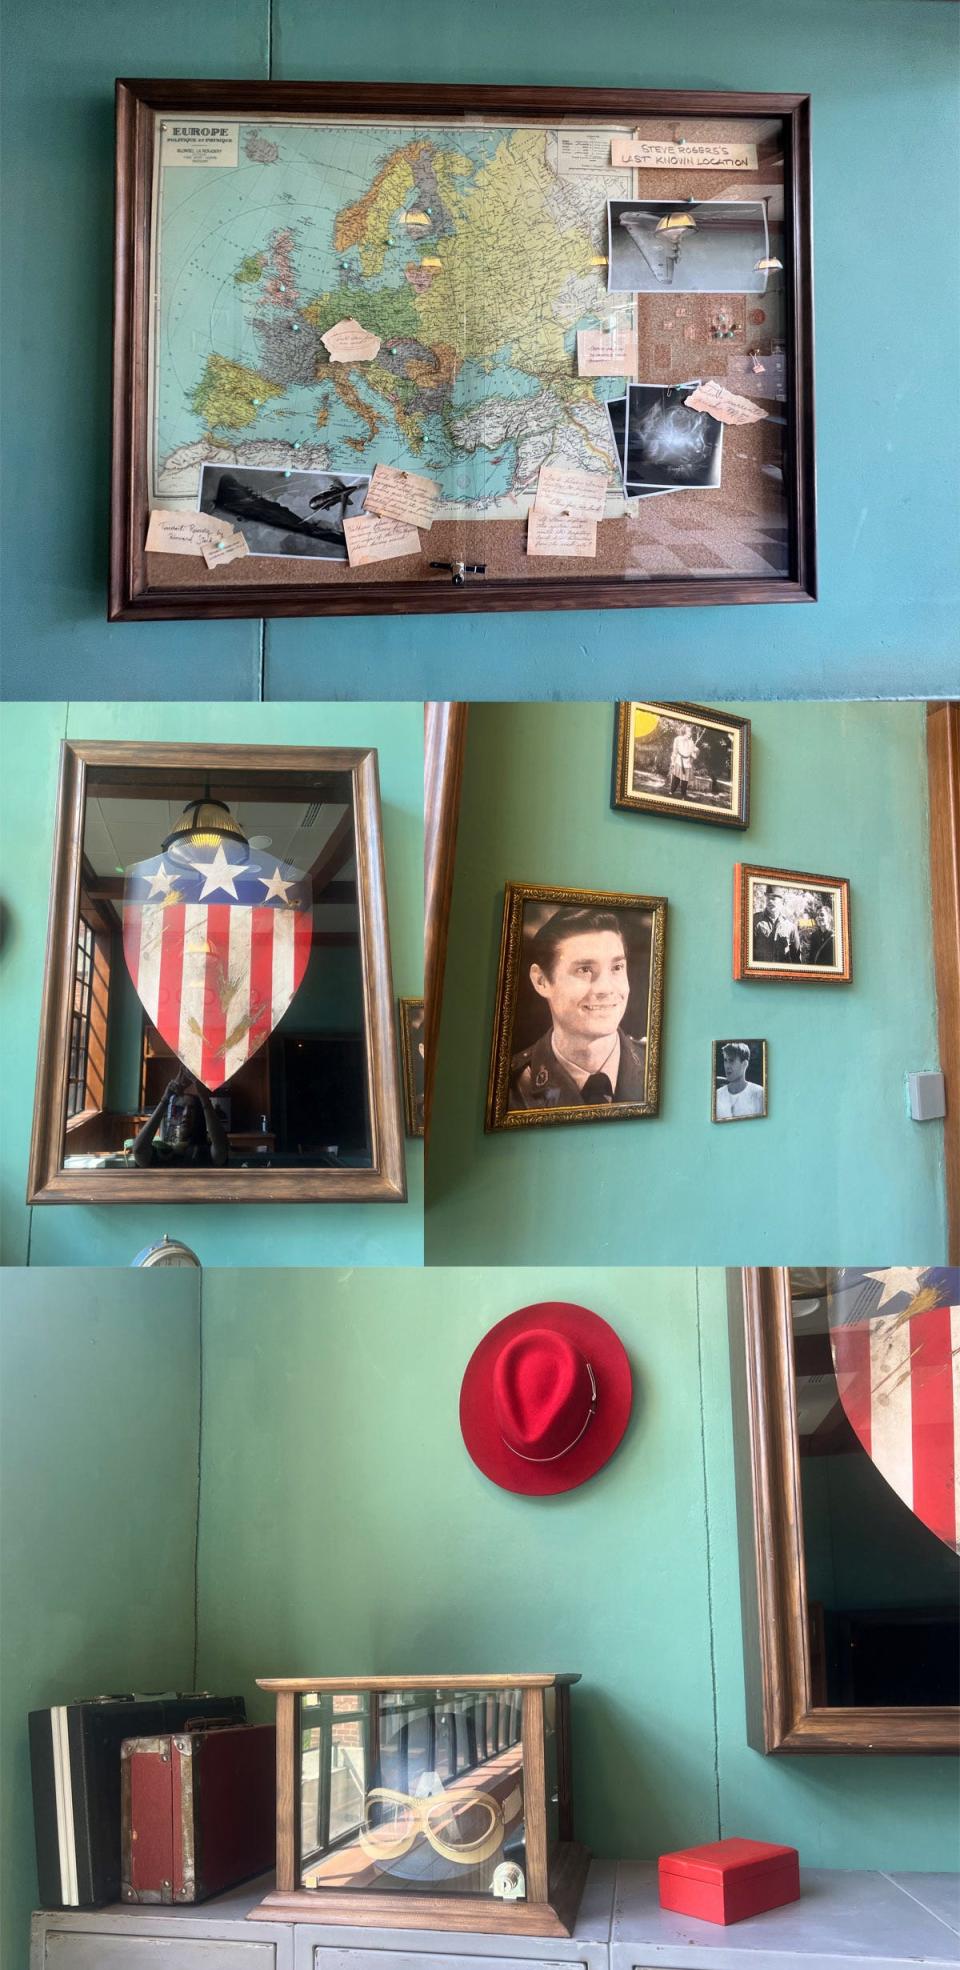 Easter eggs in Peggy Carter's office at Avengers Campus in Disneyland Paris